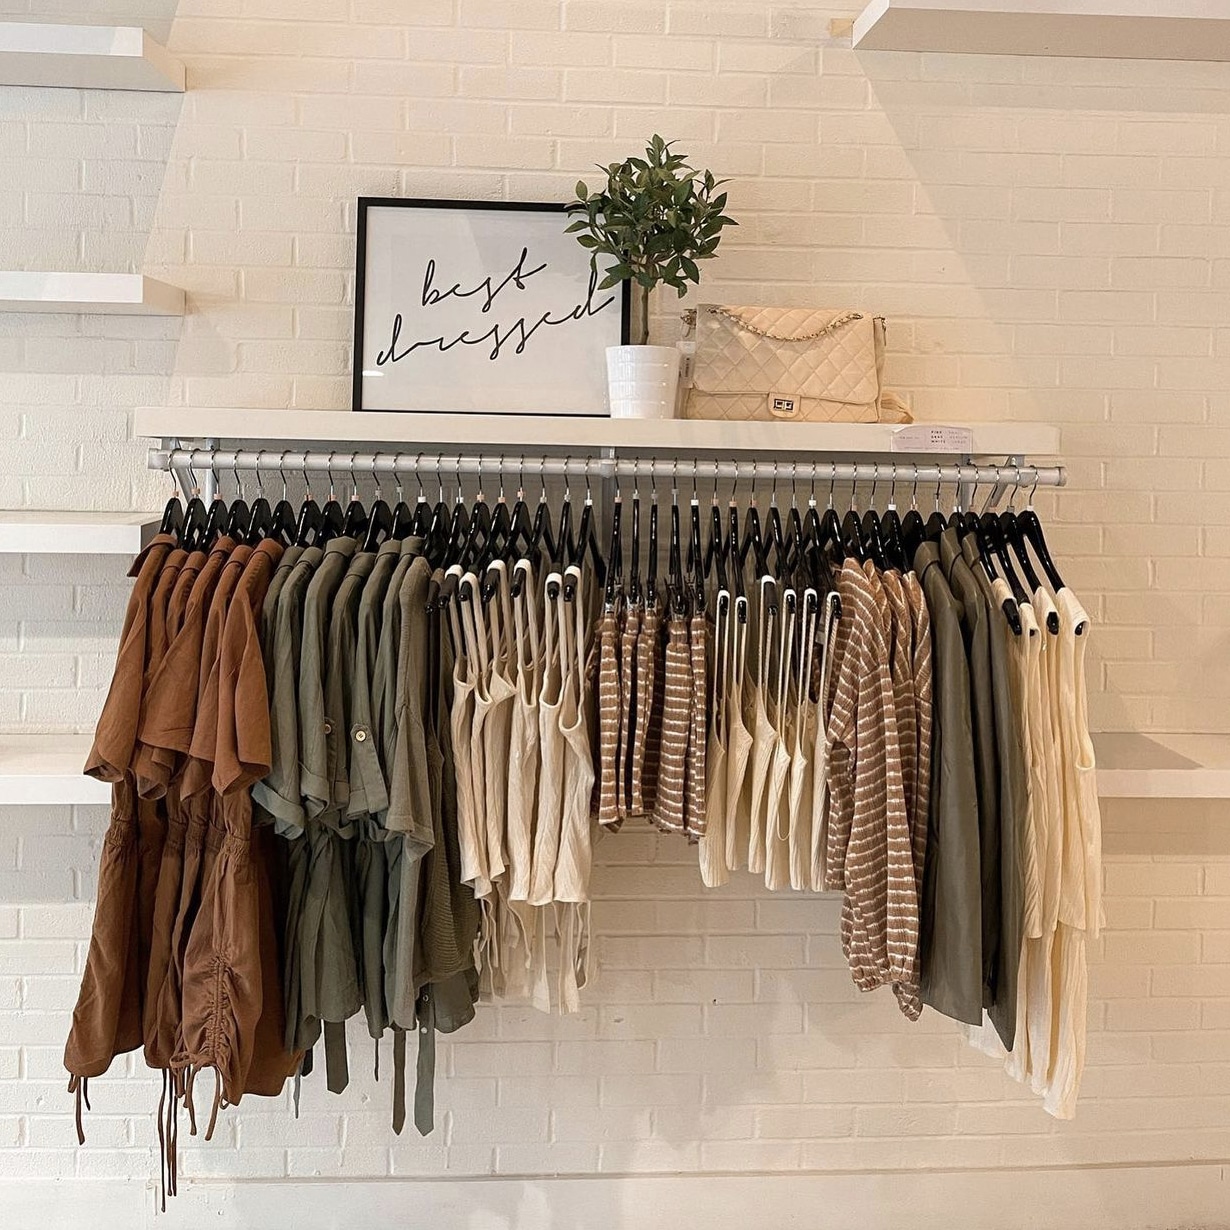 Clothing Rack with PRIMP clothing hanging